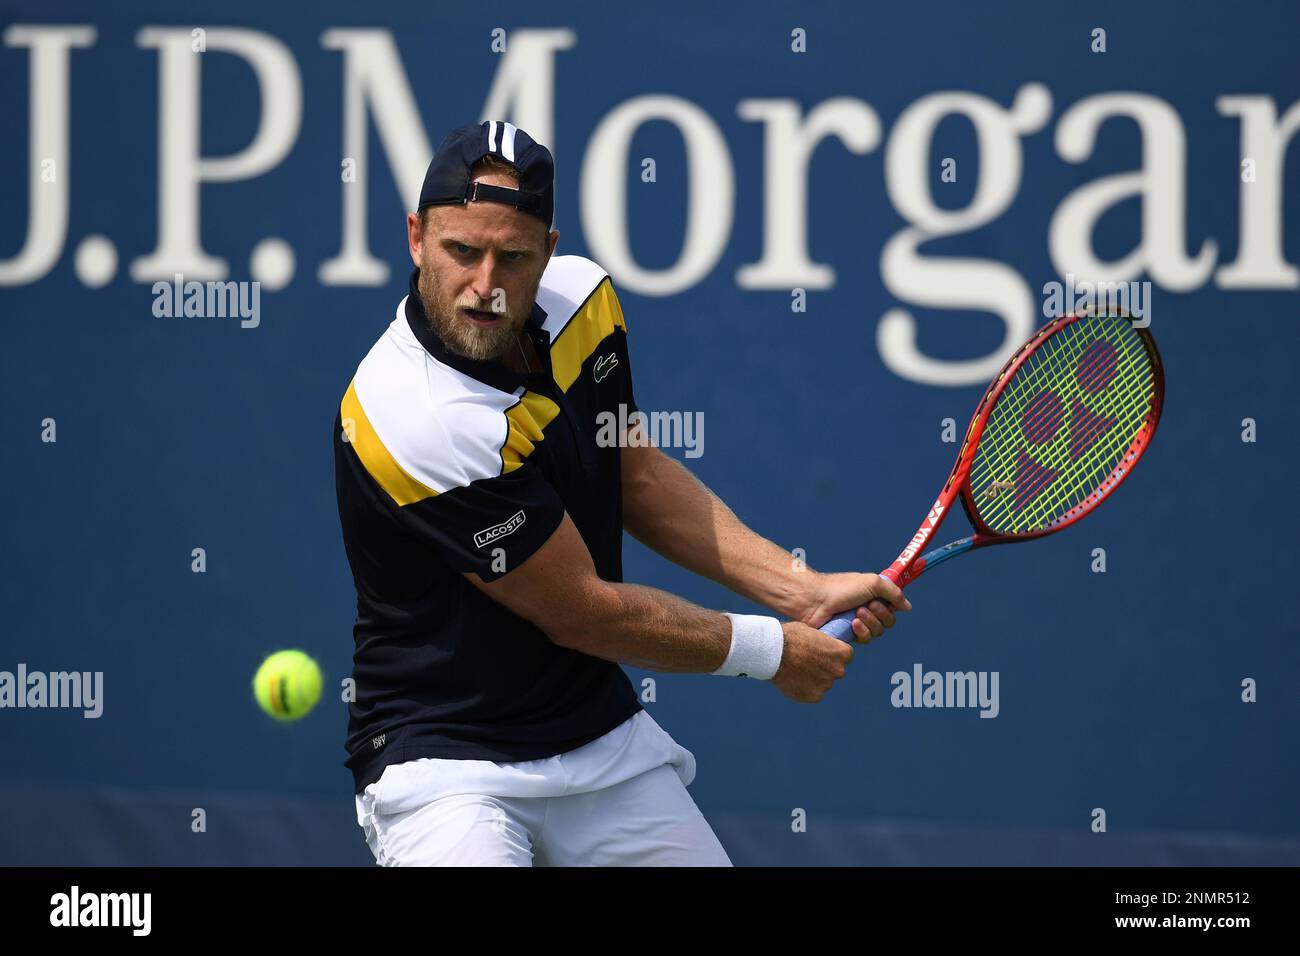 Denis Kudla eyes the tennis ball during a Mens Singles match at the 2021 US Open, Tuesday, Aug